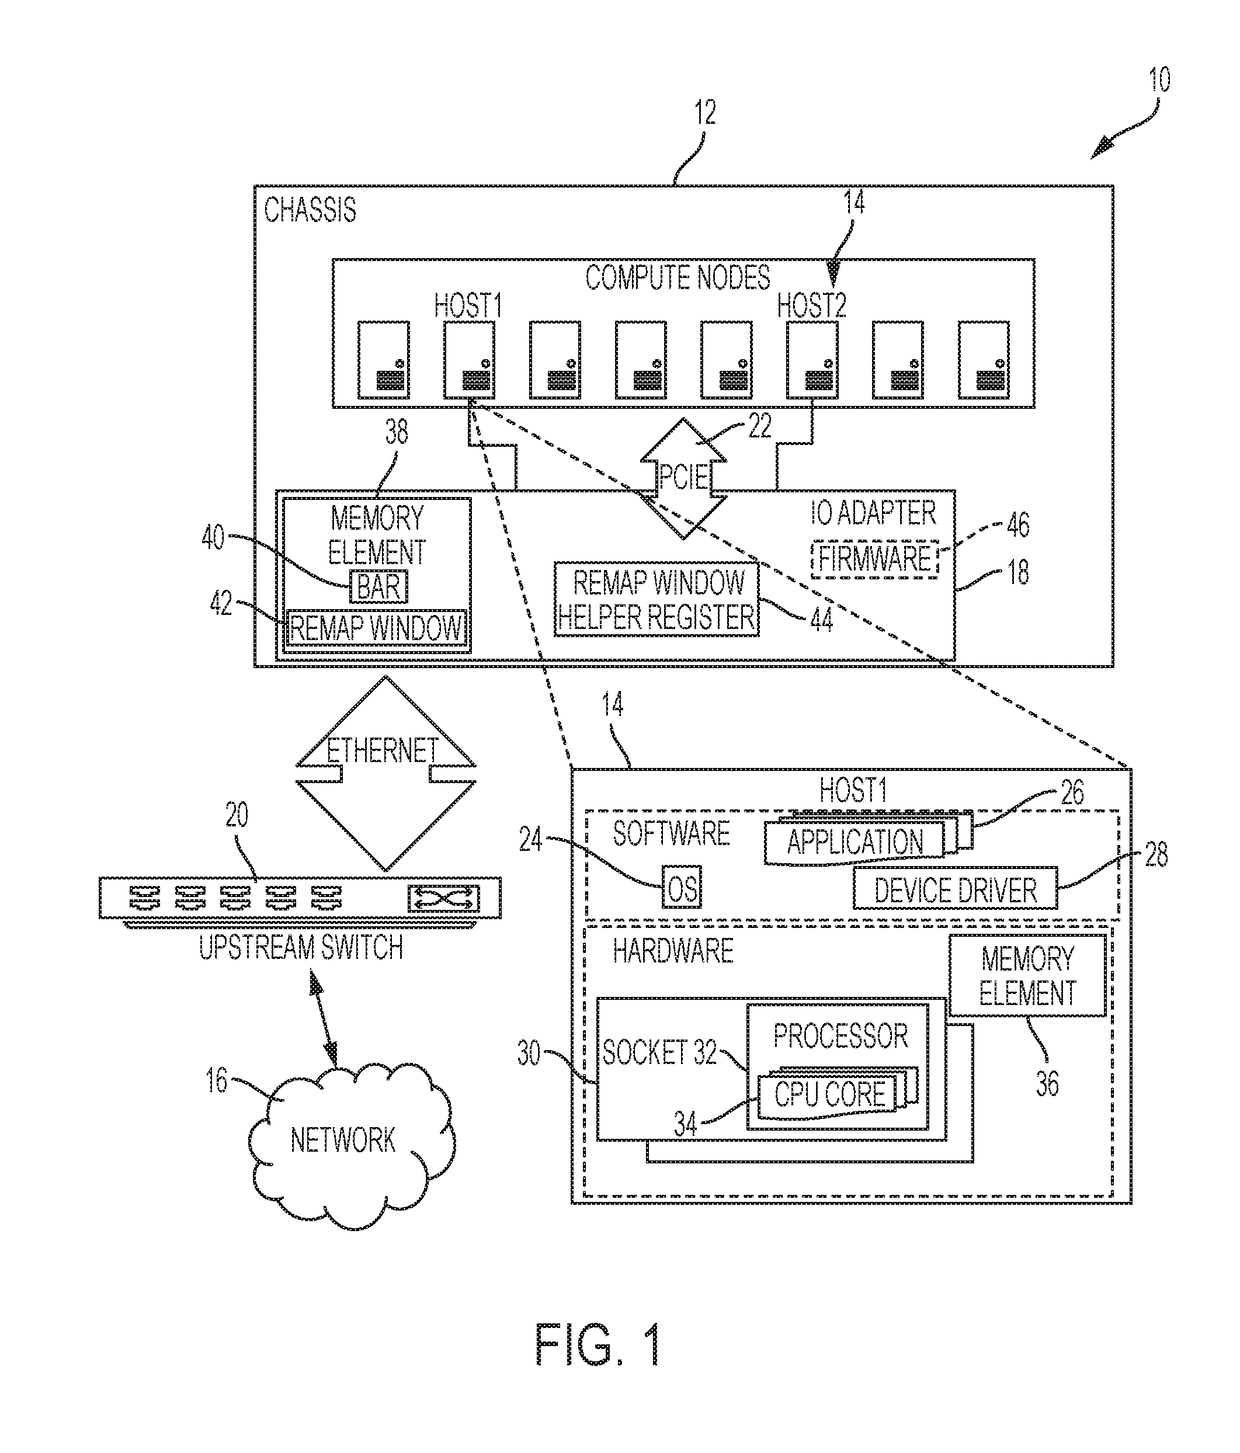 Remote memory access using memory mapped addressing among multiple compute nodes